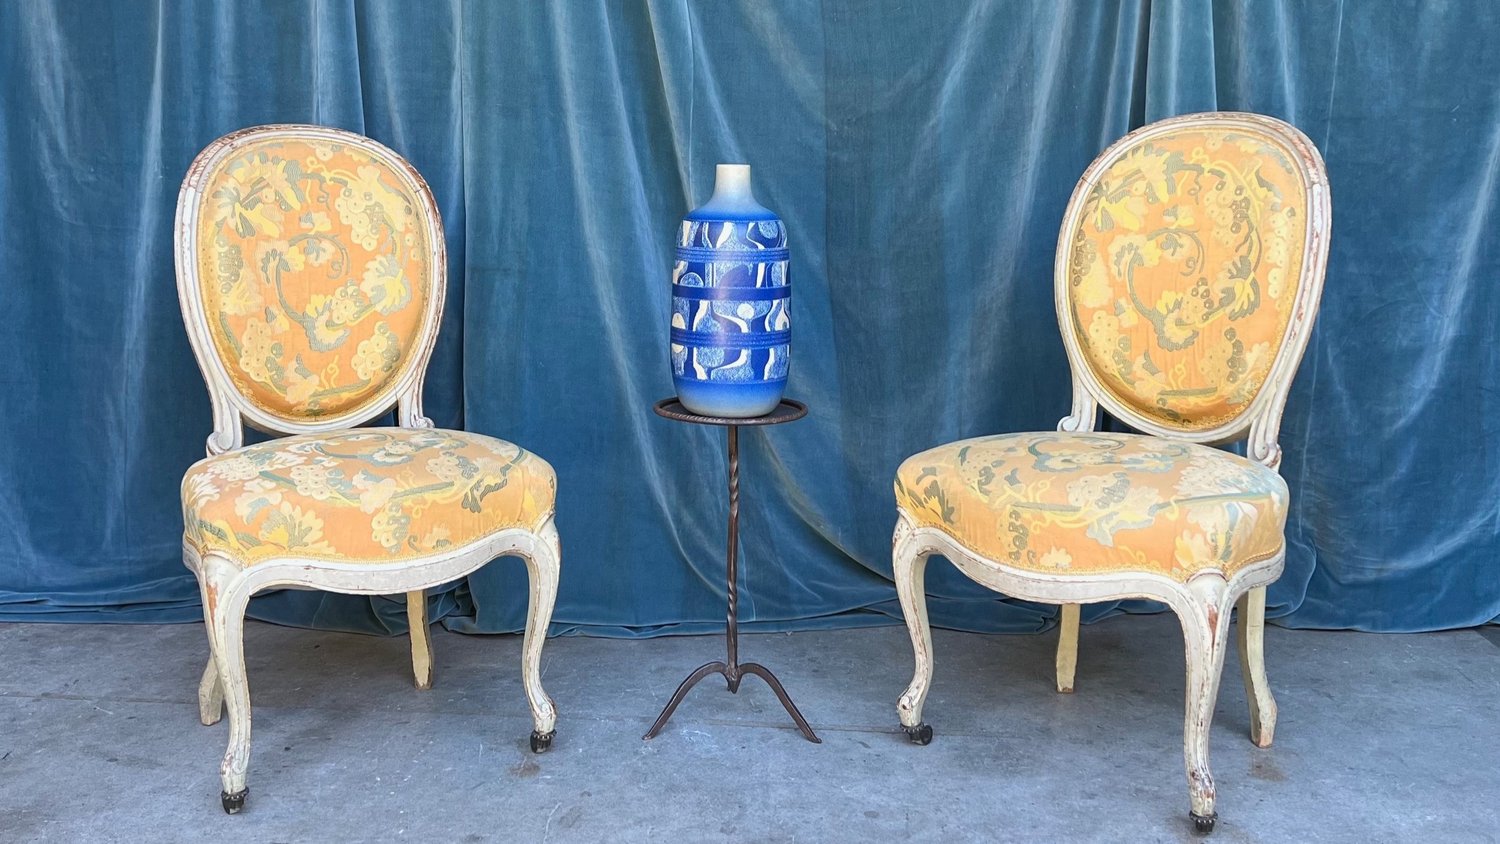 French 19th century Louis XV arm chair with blue upholstery.